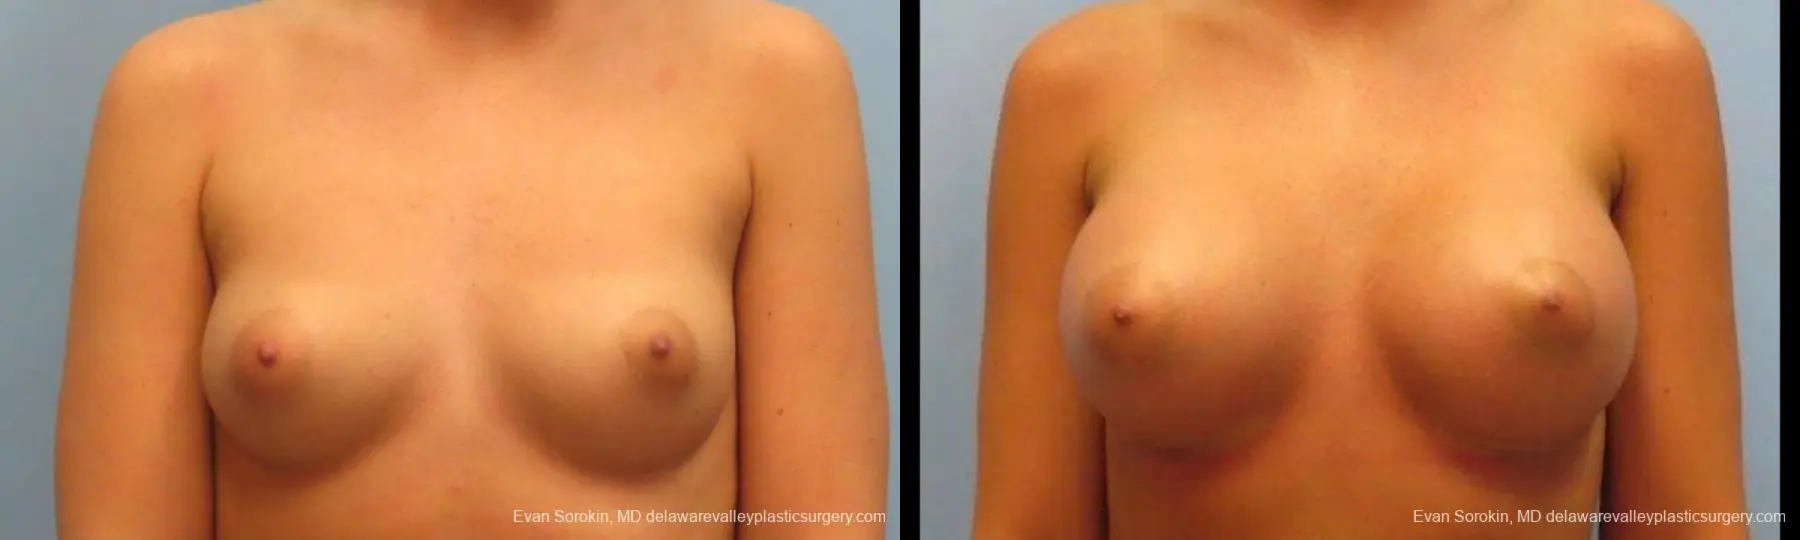 Breast Augmentation: Patient 12 - Before and After 1